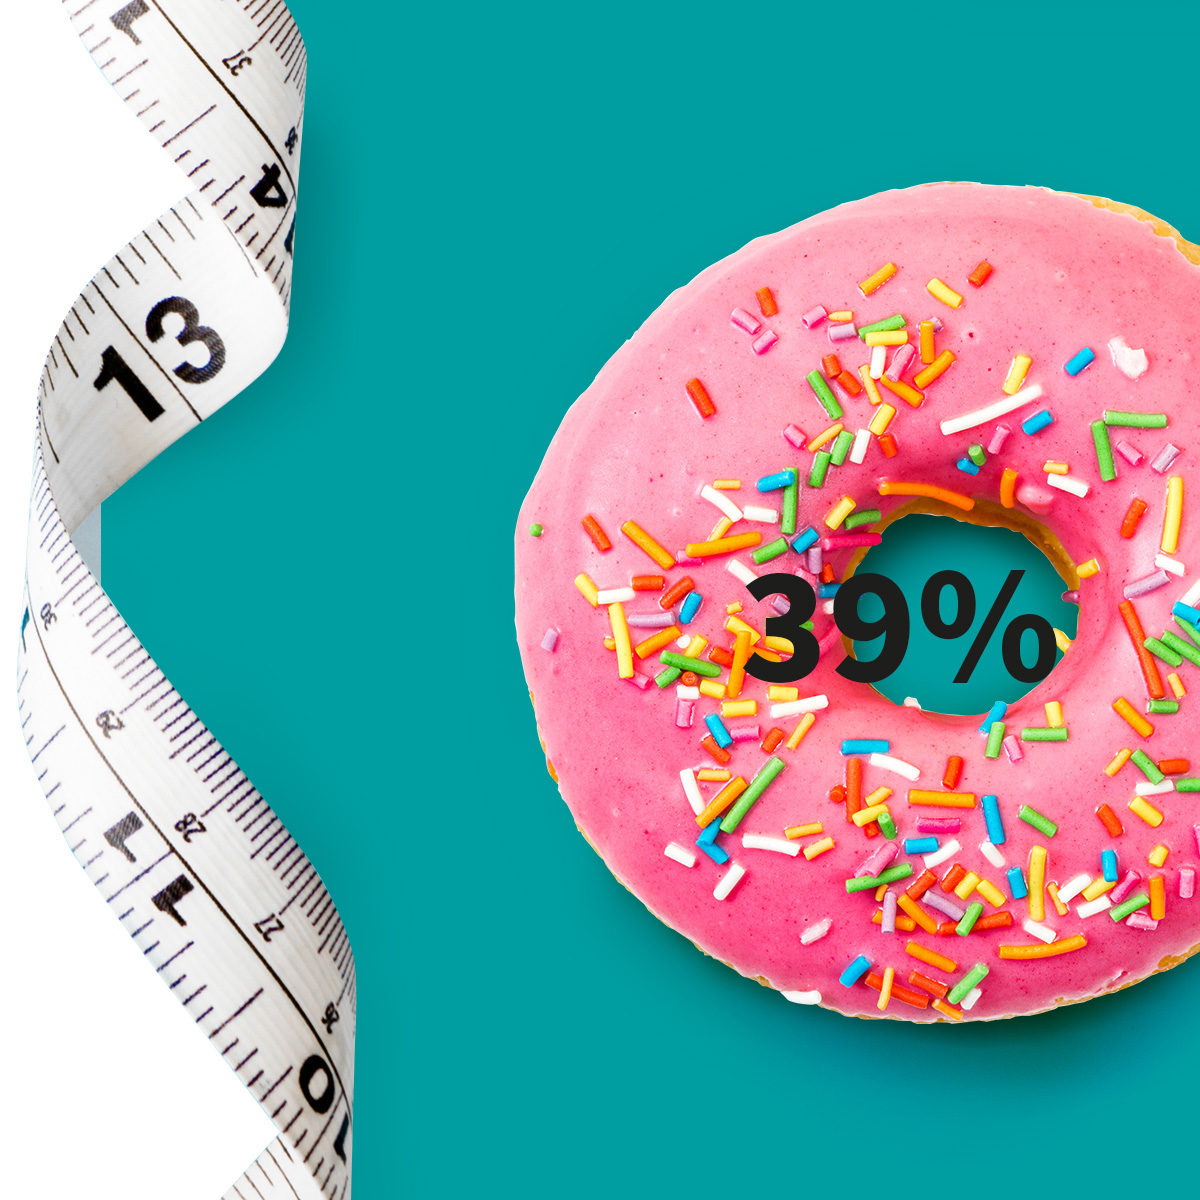 [.ES-pt Spain (portuguese)] •	A measuring tape and a doughnut with pink icing and colourful sugar sprinkle as a metaphor for obesity